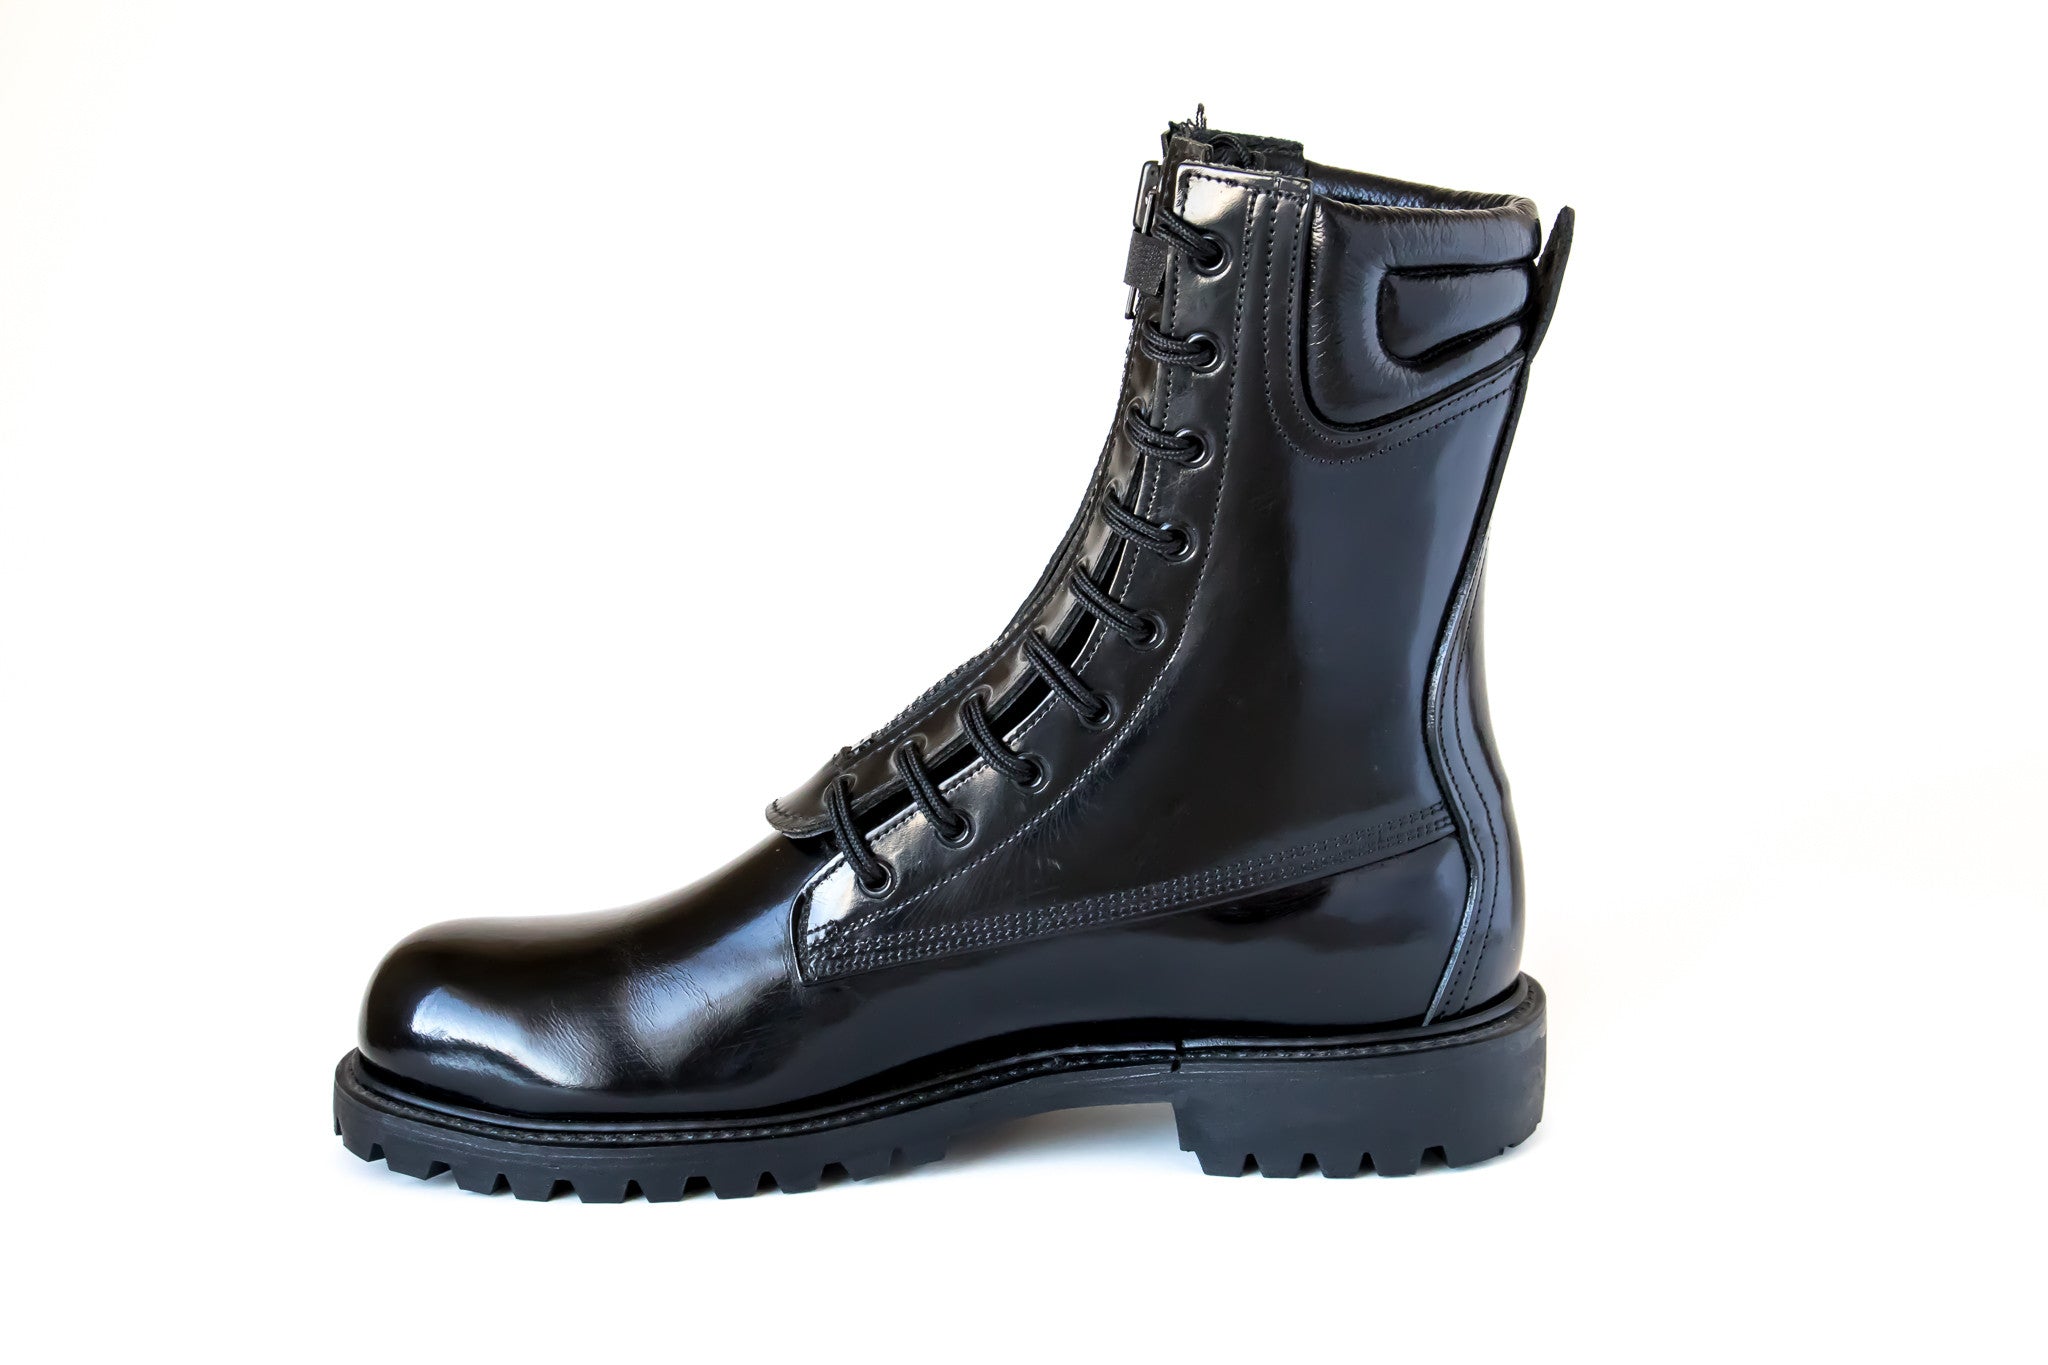 FFB 105 - 8" Structural (Non-Steel) Firefighter Station/Duty Boots